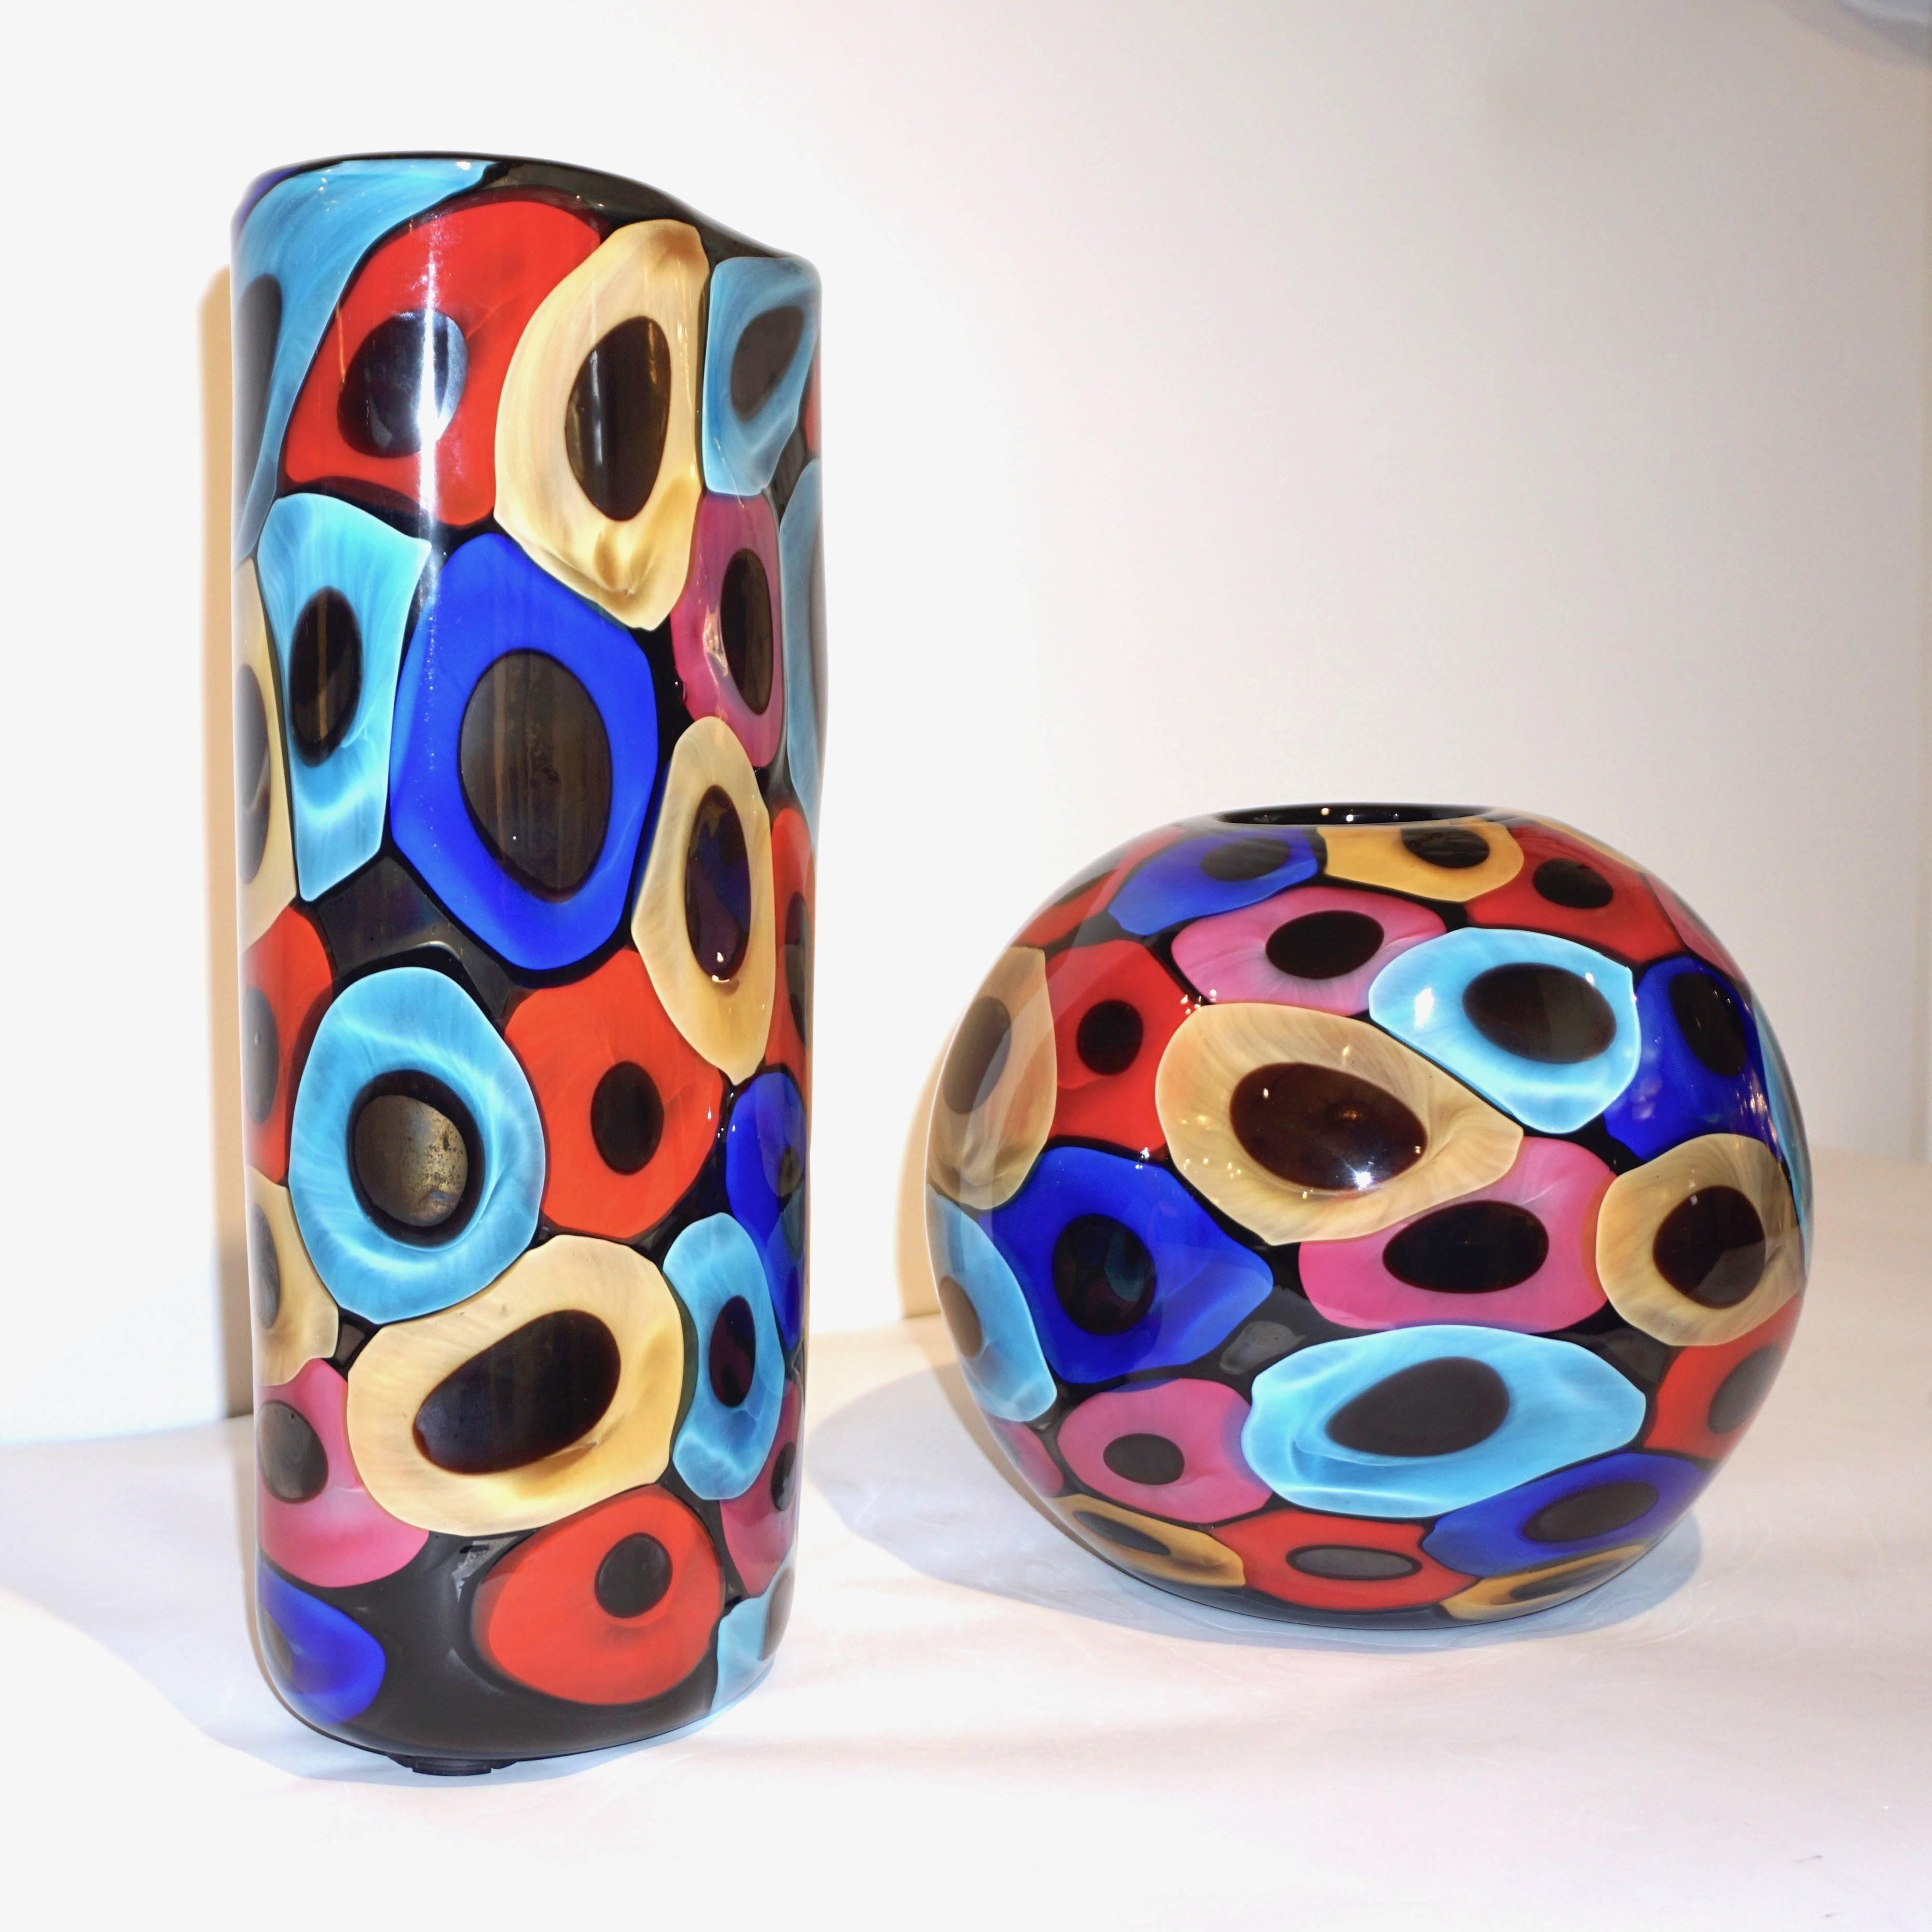 24 Recommended Murano Italy Glass Vase 2023 free download murano italy glass vase of camozzo 1990 modern black azure blue red pink yellow murano glass for camozzo 1990 modern black azure blue red pink yellow murano glass vases for sale at 1stdibs